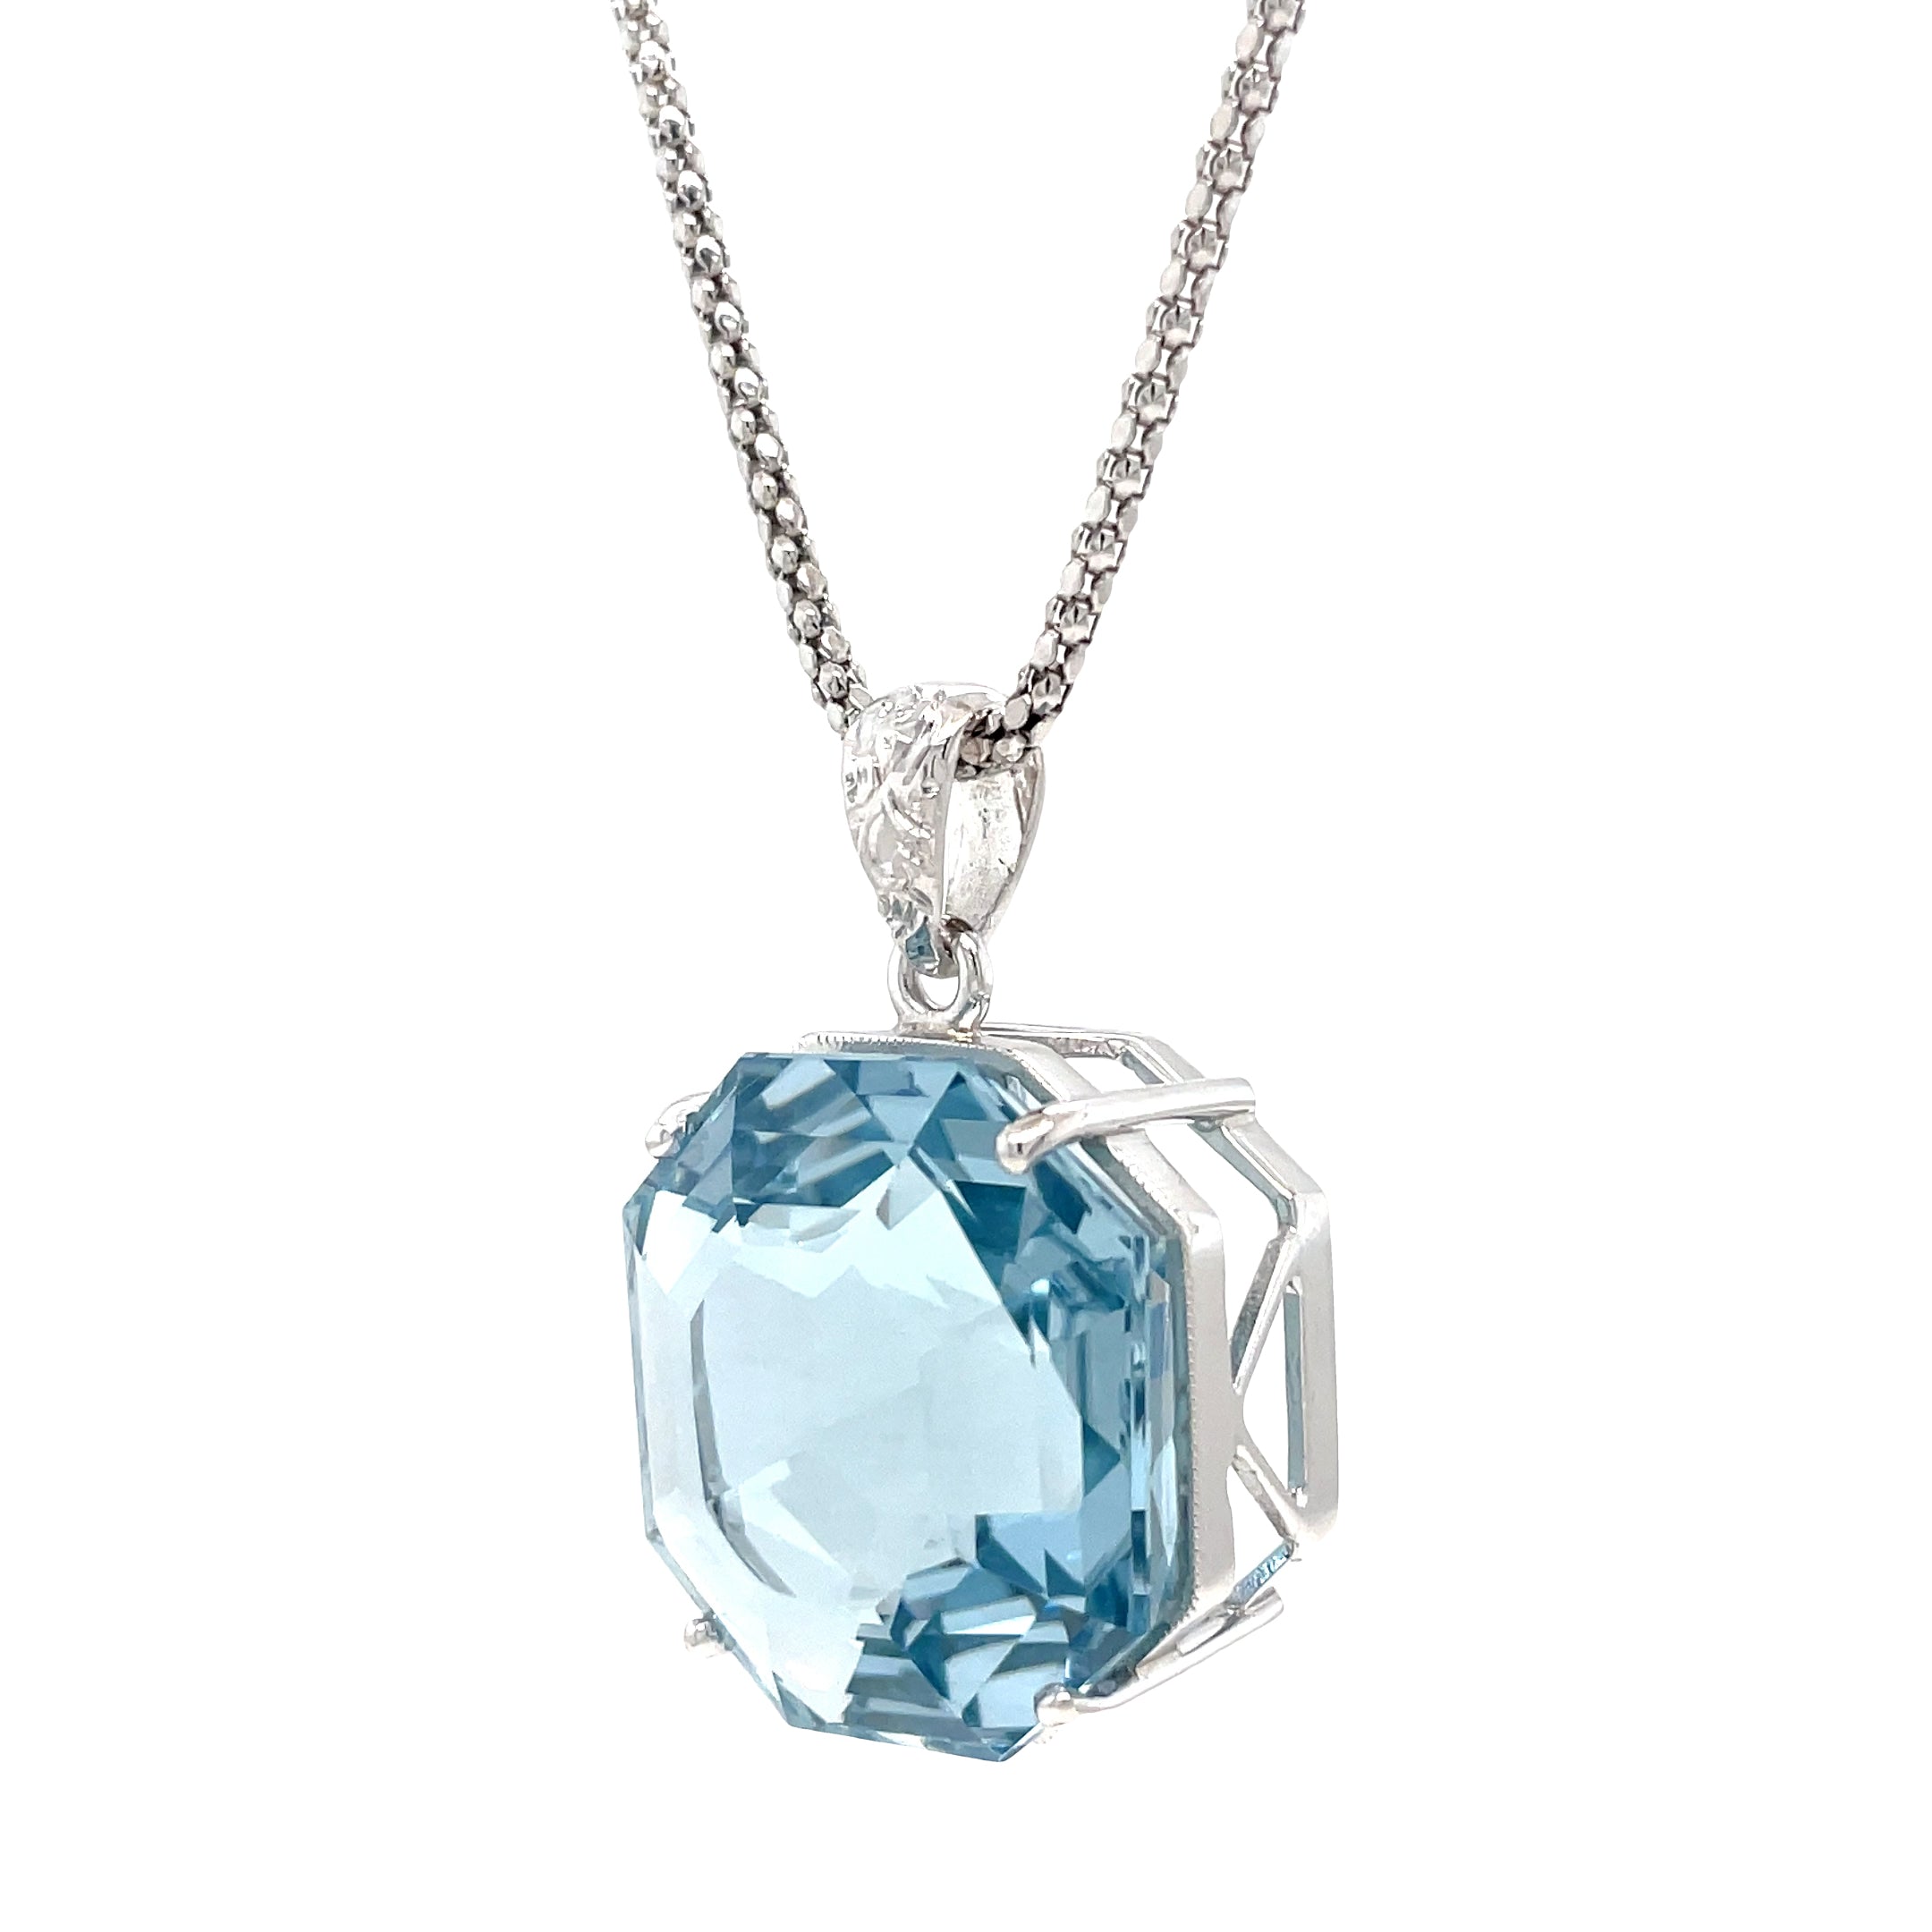 Expertly designed and crafted, our Aquamarine &amp; Diamond Necklace features a stunning octahedron aquamarine with a diamond bail. The custom-made white gold mounting adds a touch of elegance and is complemented by an Italian-made chain. Elevate any outfit with this eye-catching necklace. Chain is optional 20" long ($550)